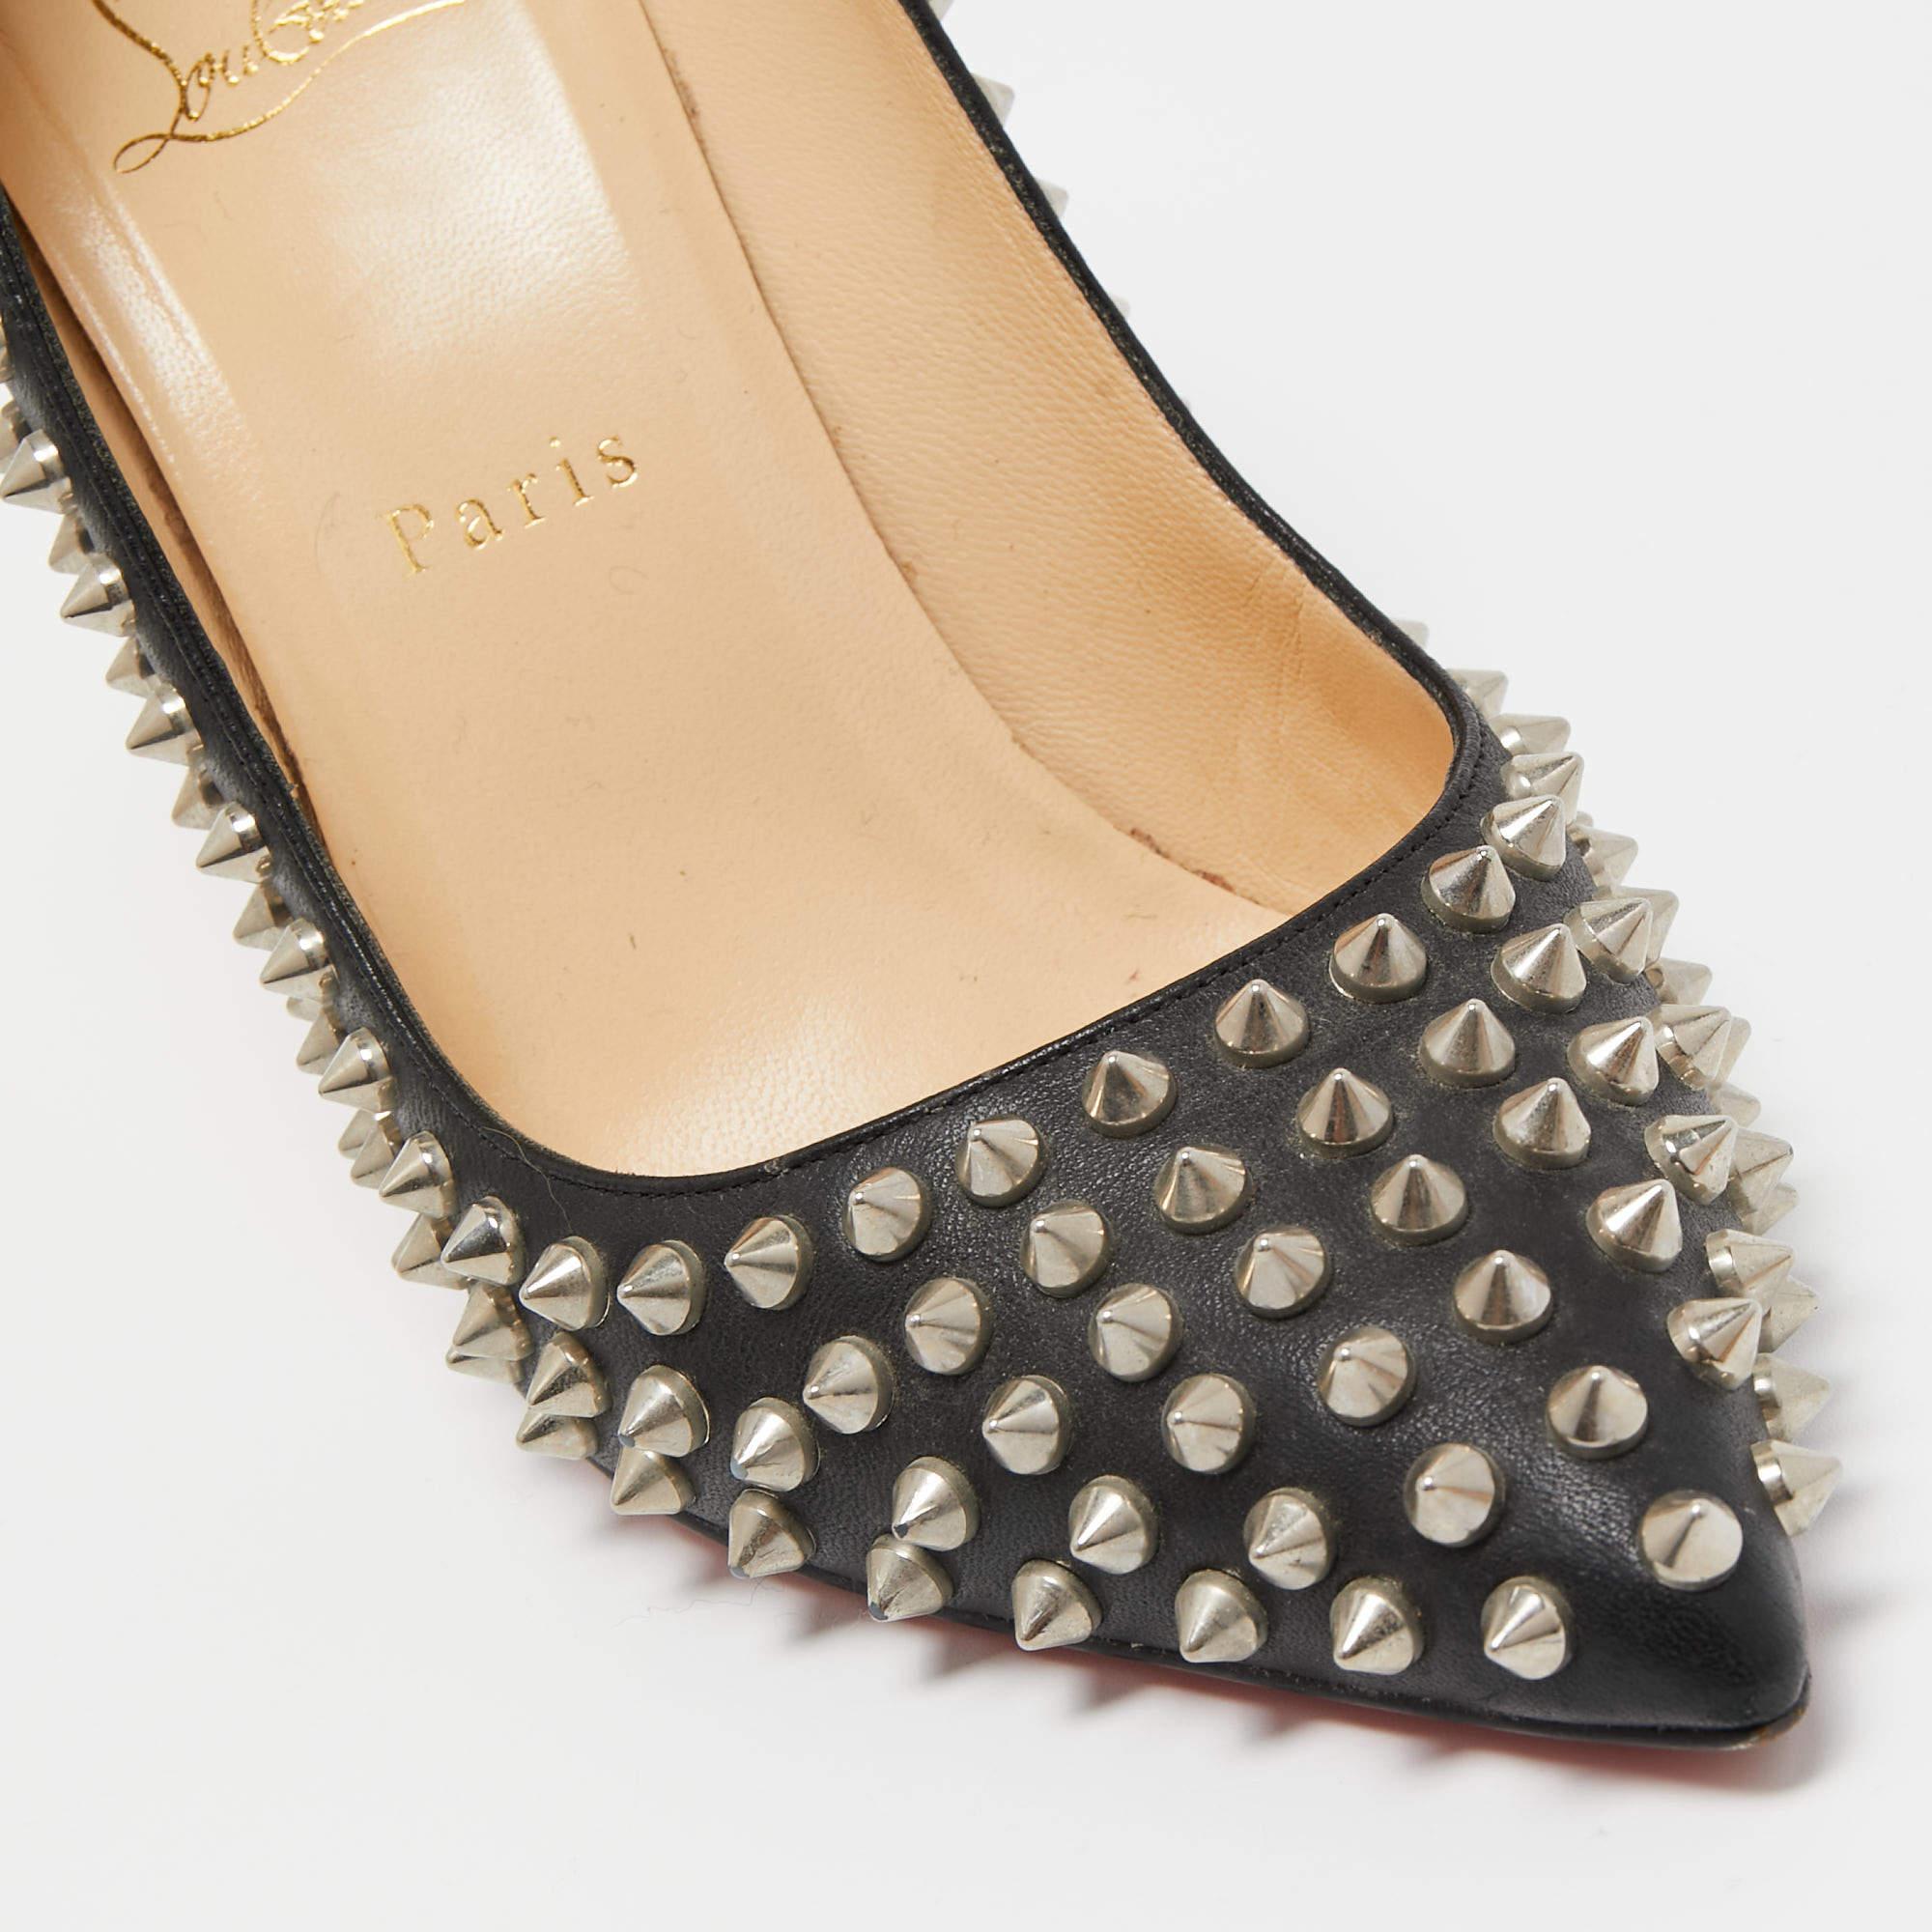 Christian Louboutin Black Leather Pigalle Spikes Pointed Toe Pumps Size 38.5 For Sale 2